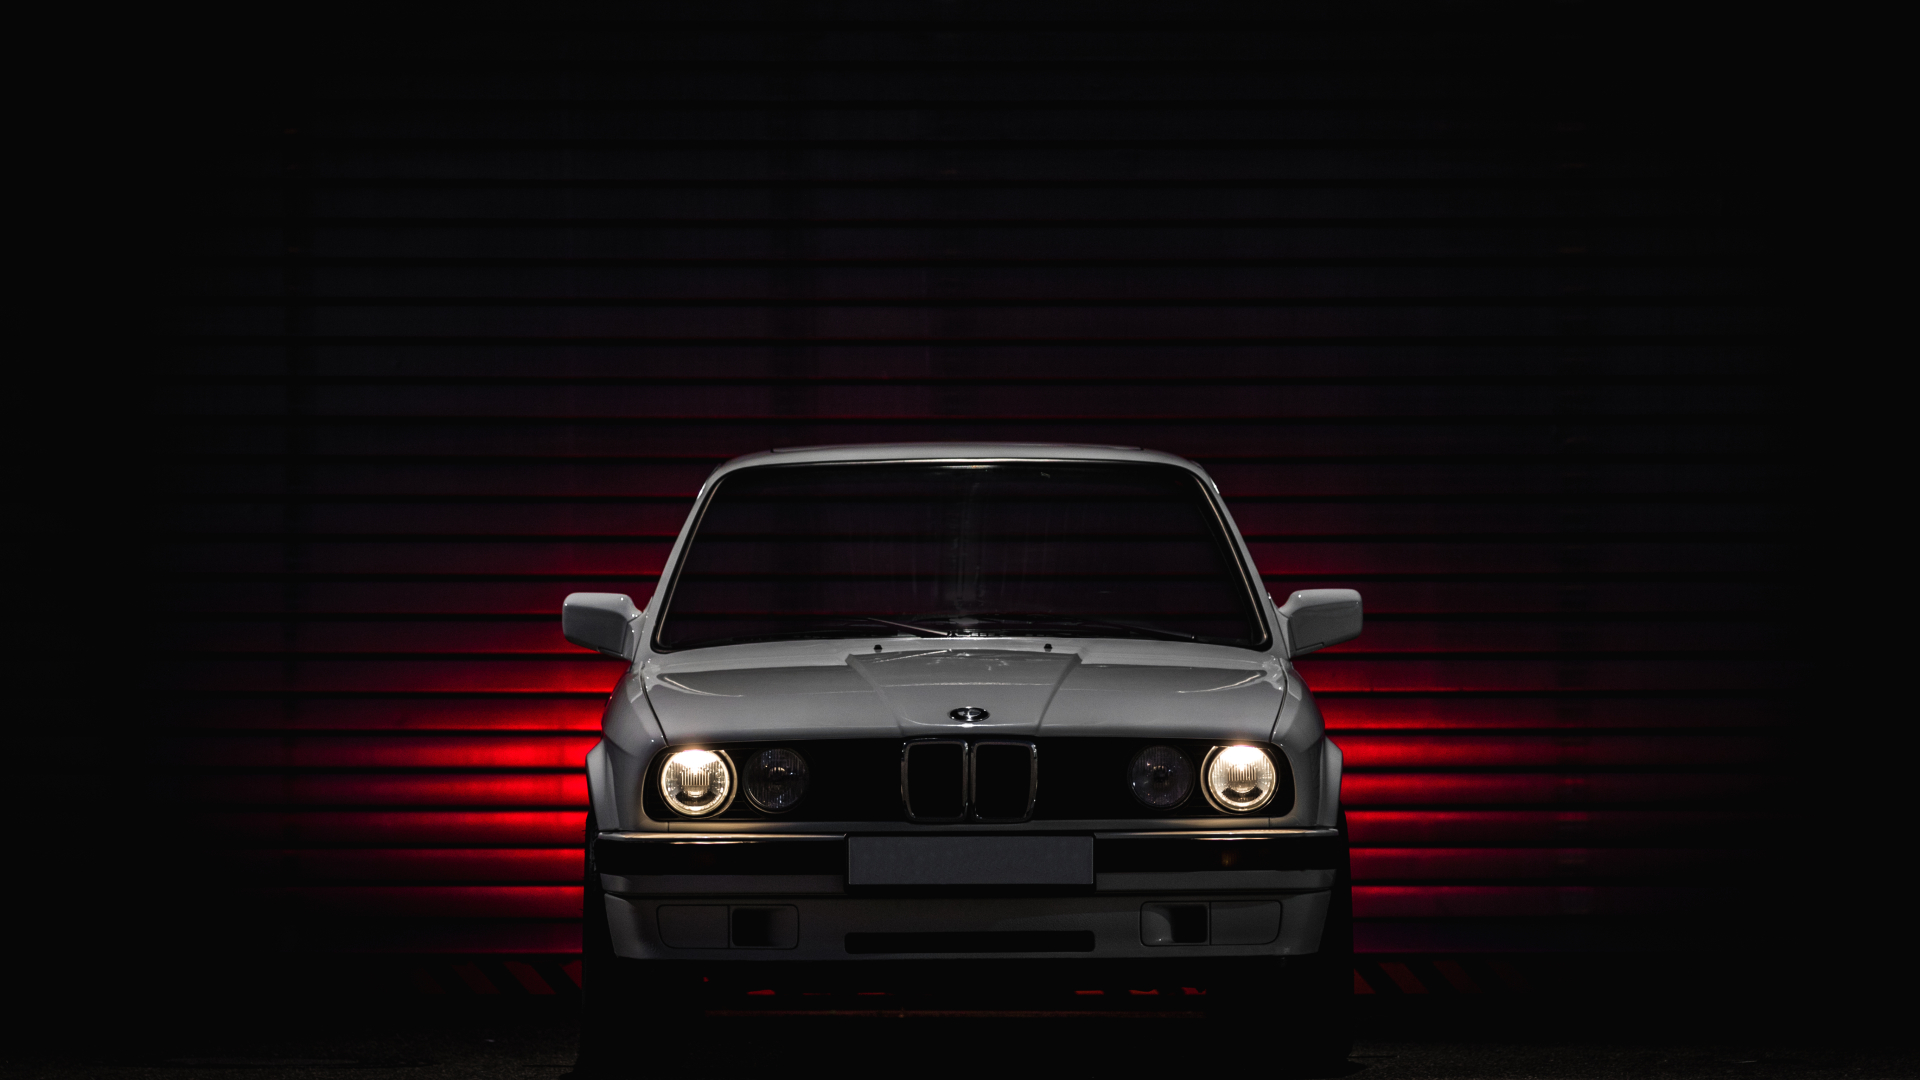 1920x1080 BMW E30 Car 1080P Laptop Full HD Wallpaper, HD Cars 4K Wallpapers, Images, Photos and